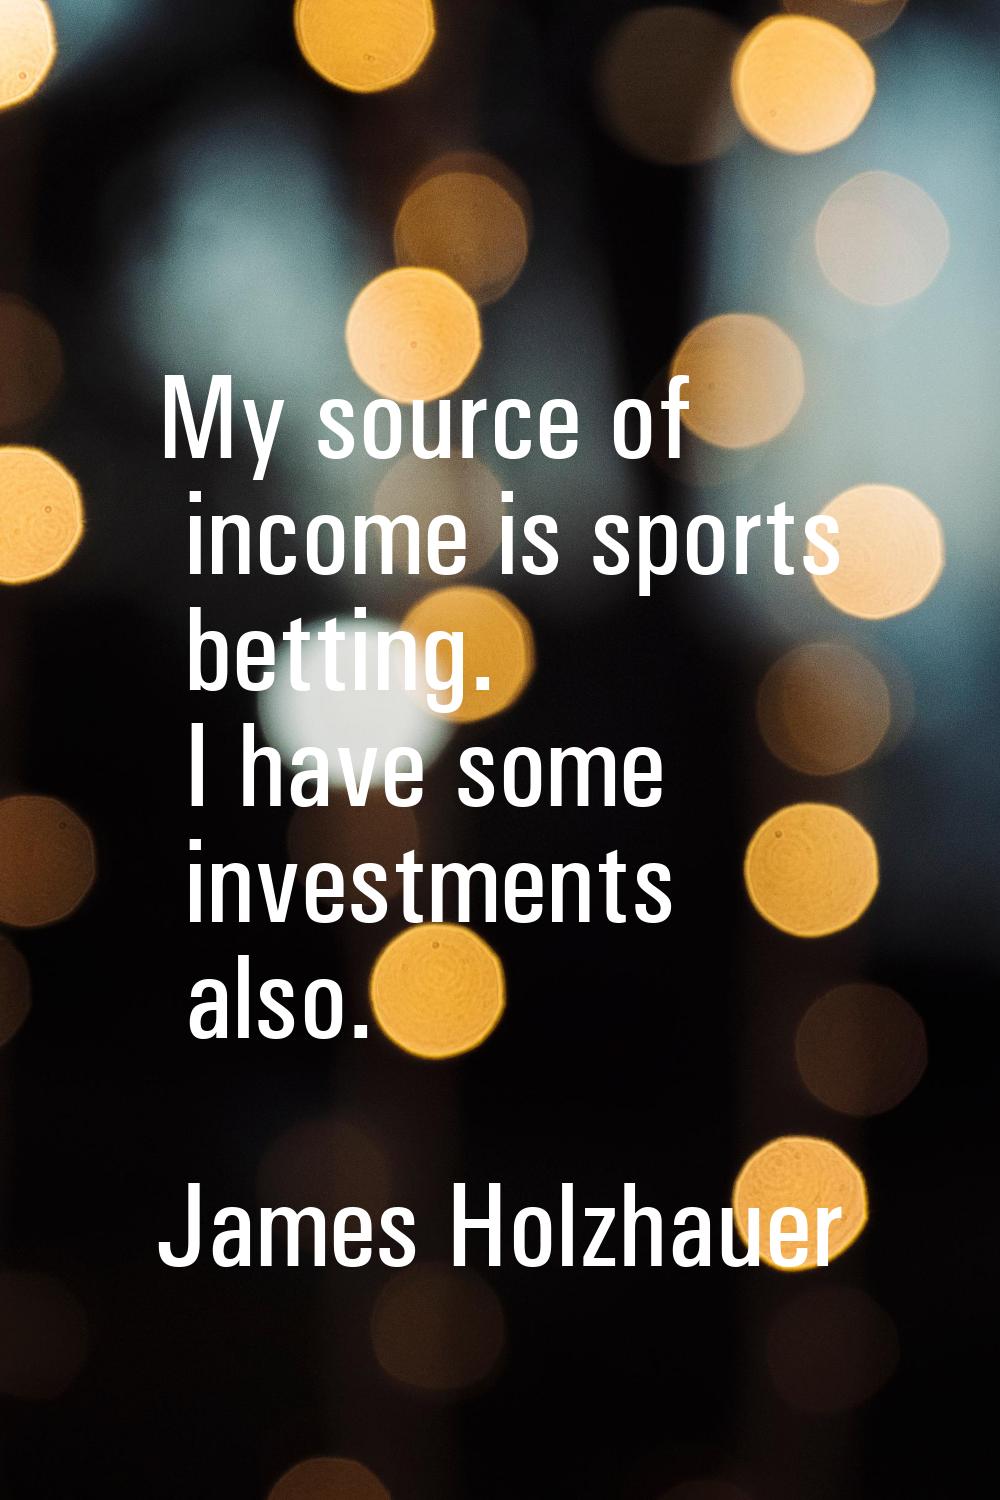 My source of income is sports betting. I have some investments also.